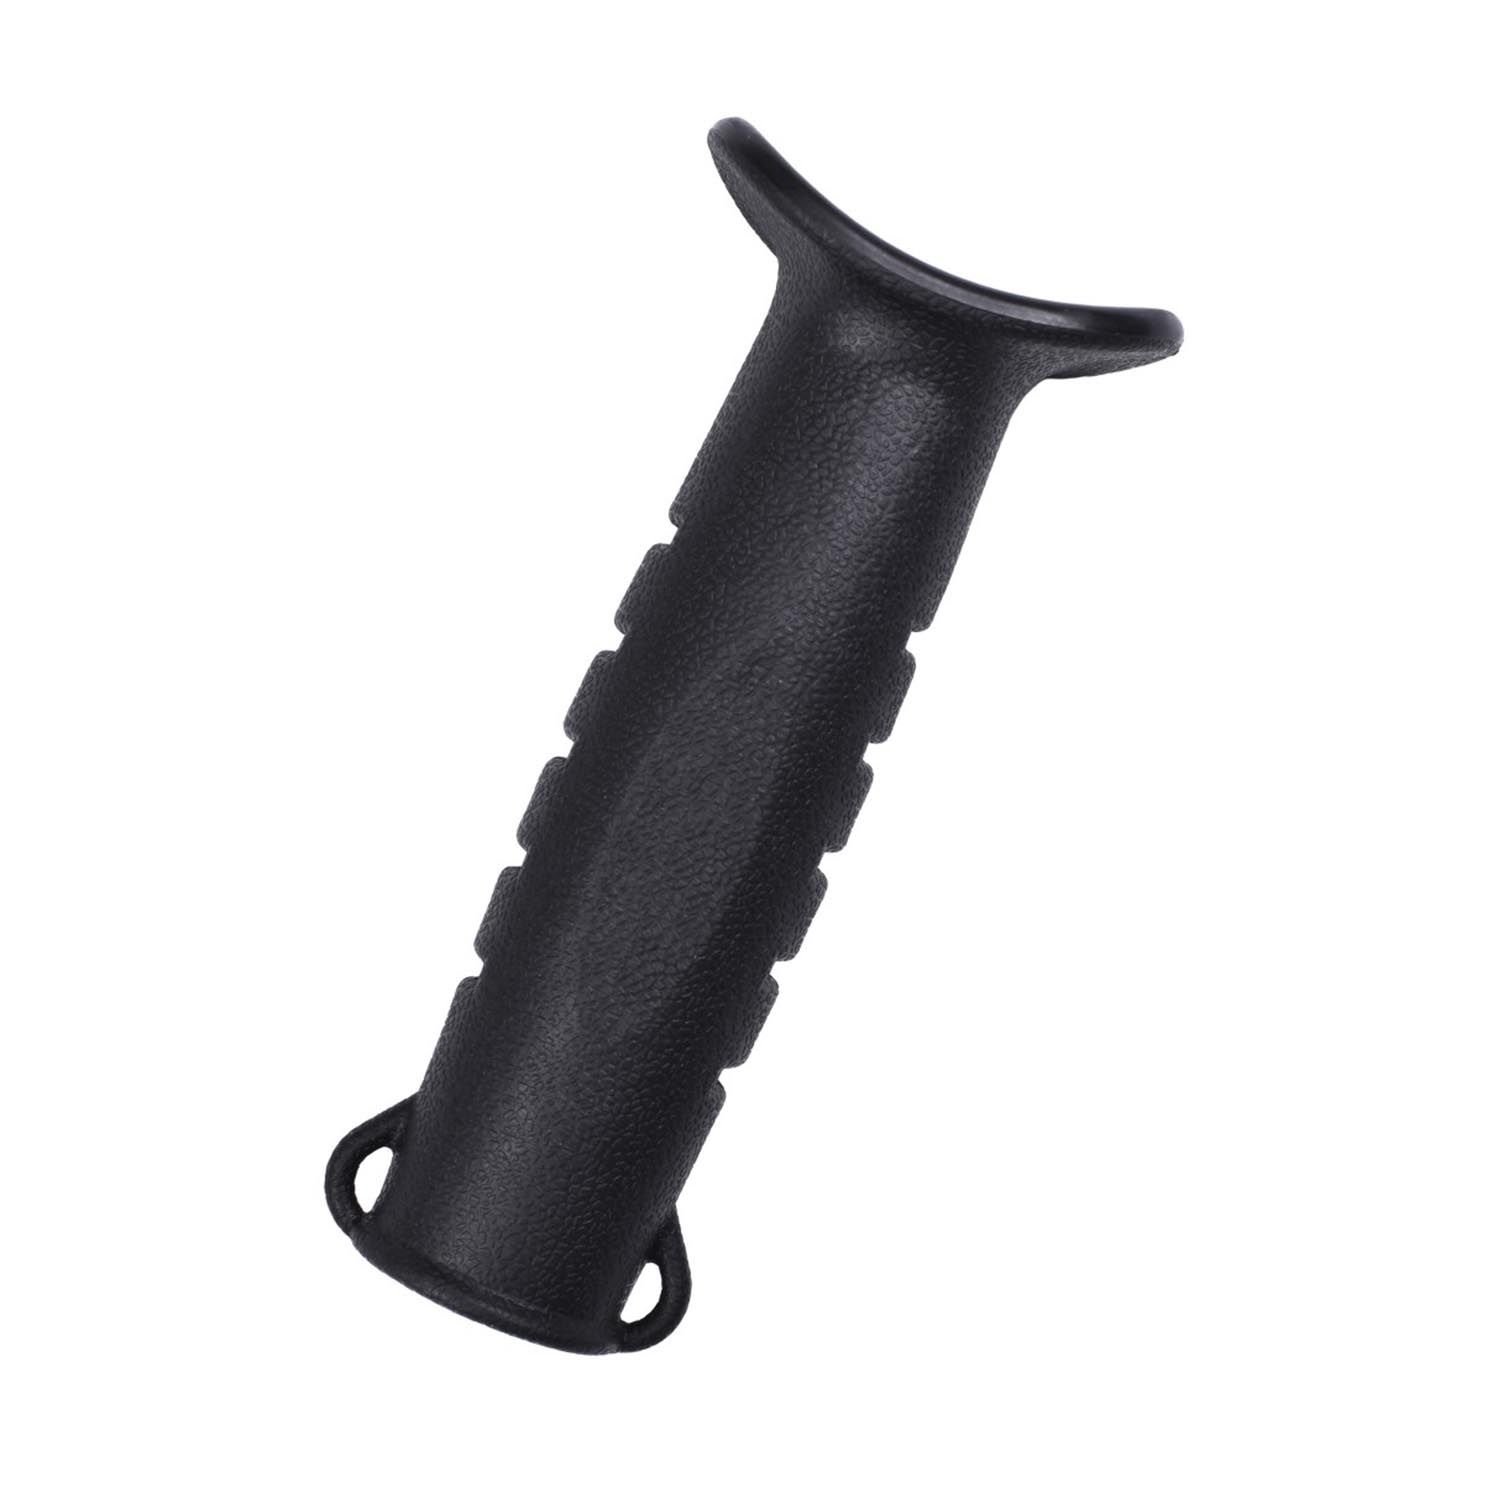  Buy Cold Steel Mouthpiece for Professional Big Bore  Blowgun online